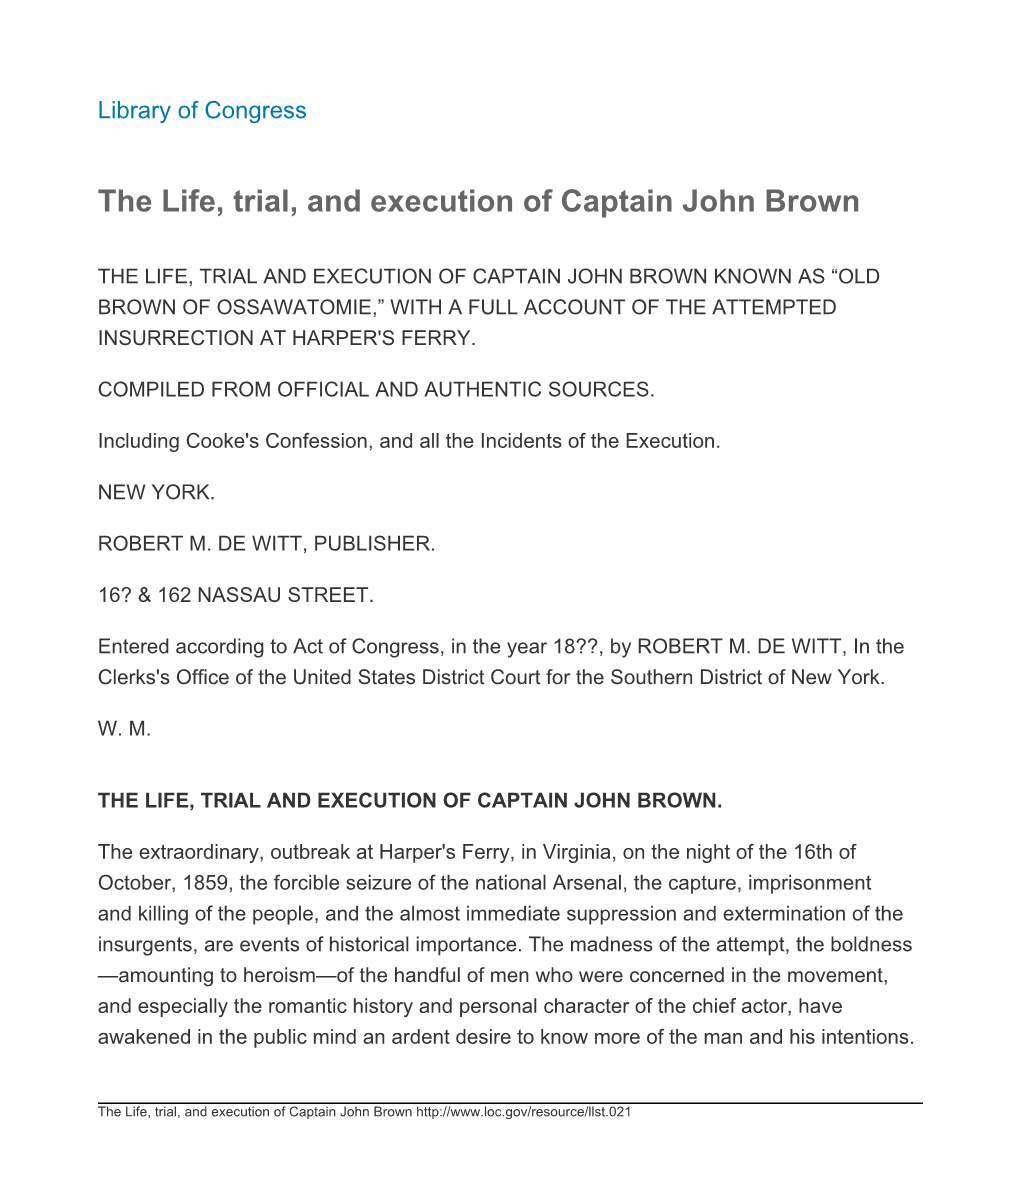 The Life, Trial, and Execution of Captain John Brown : A